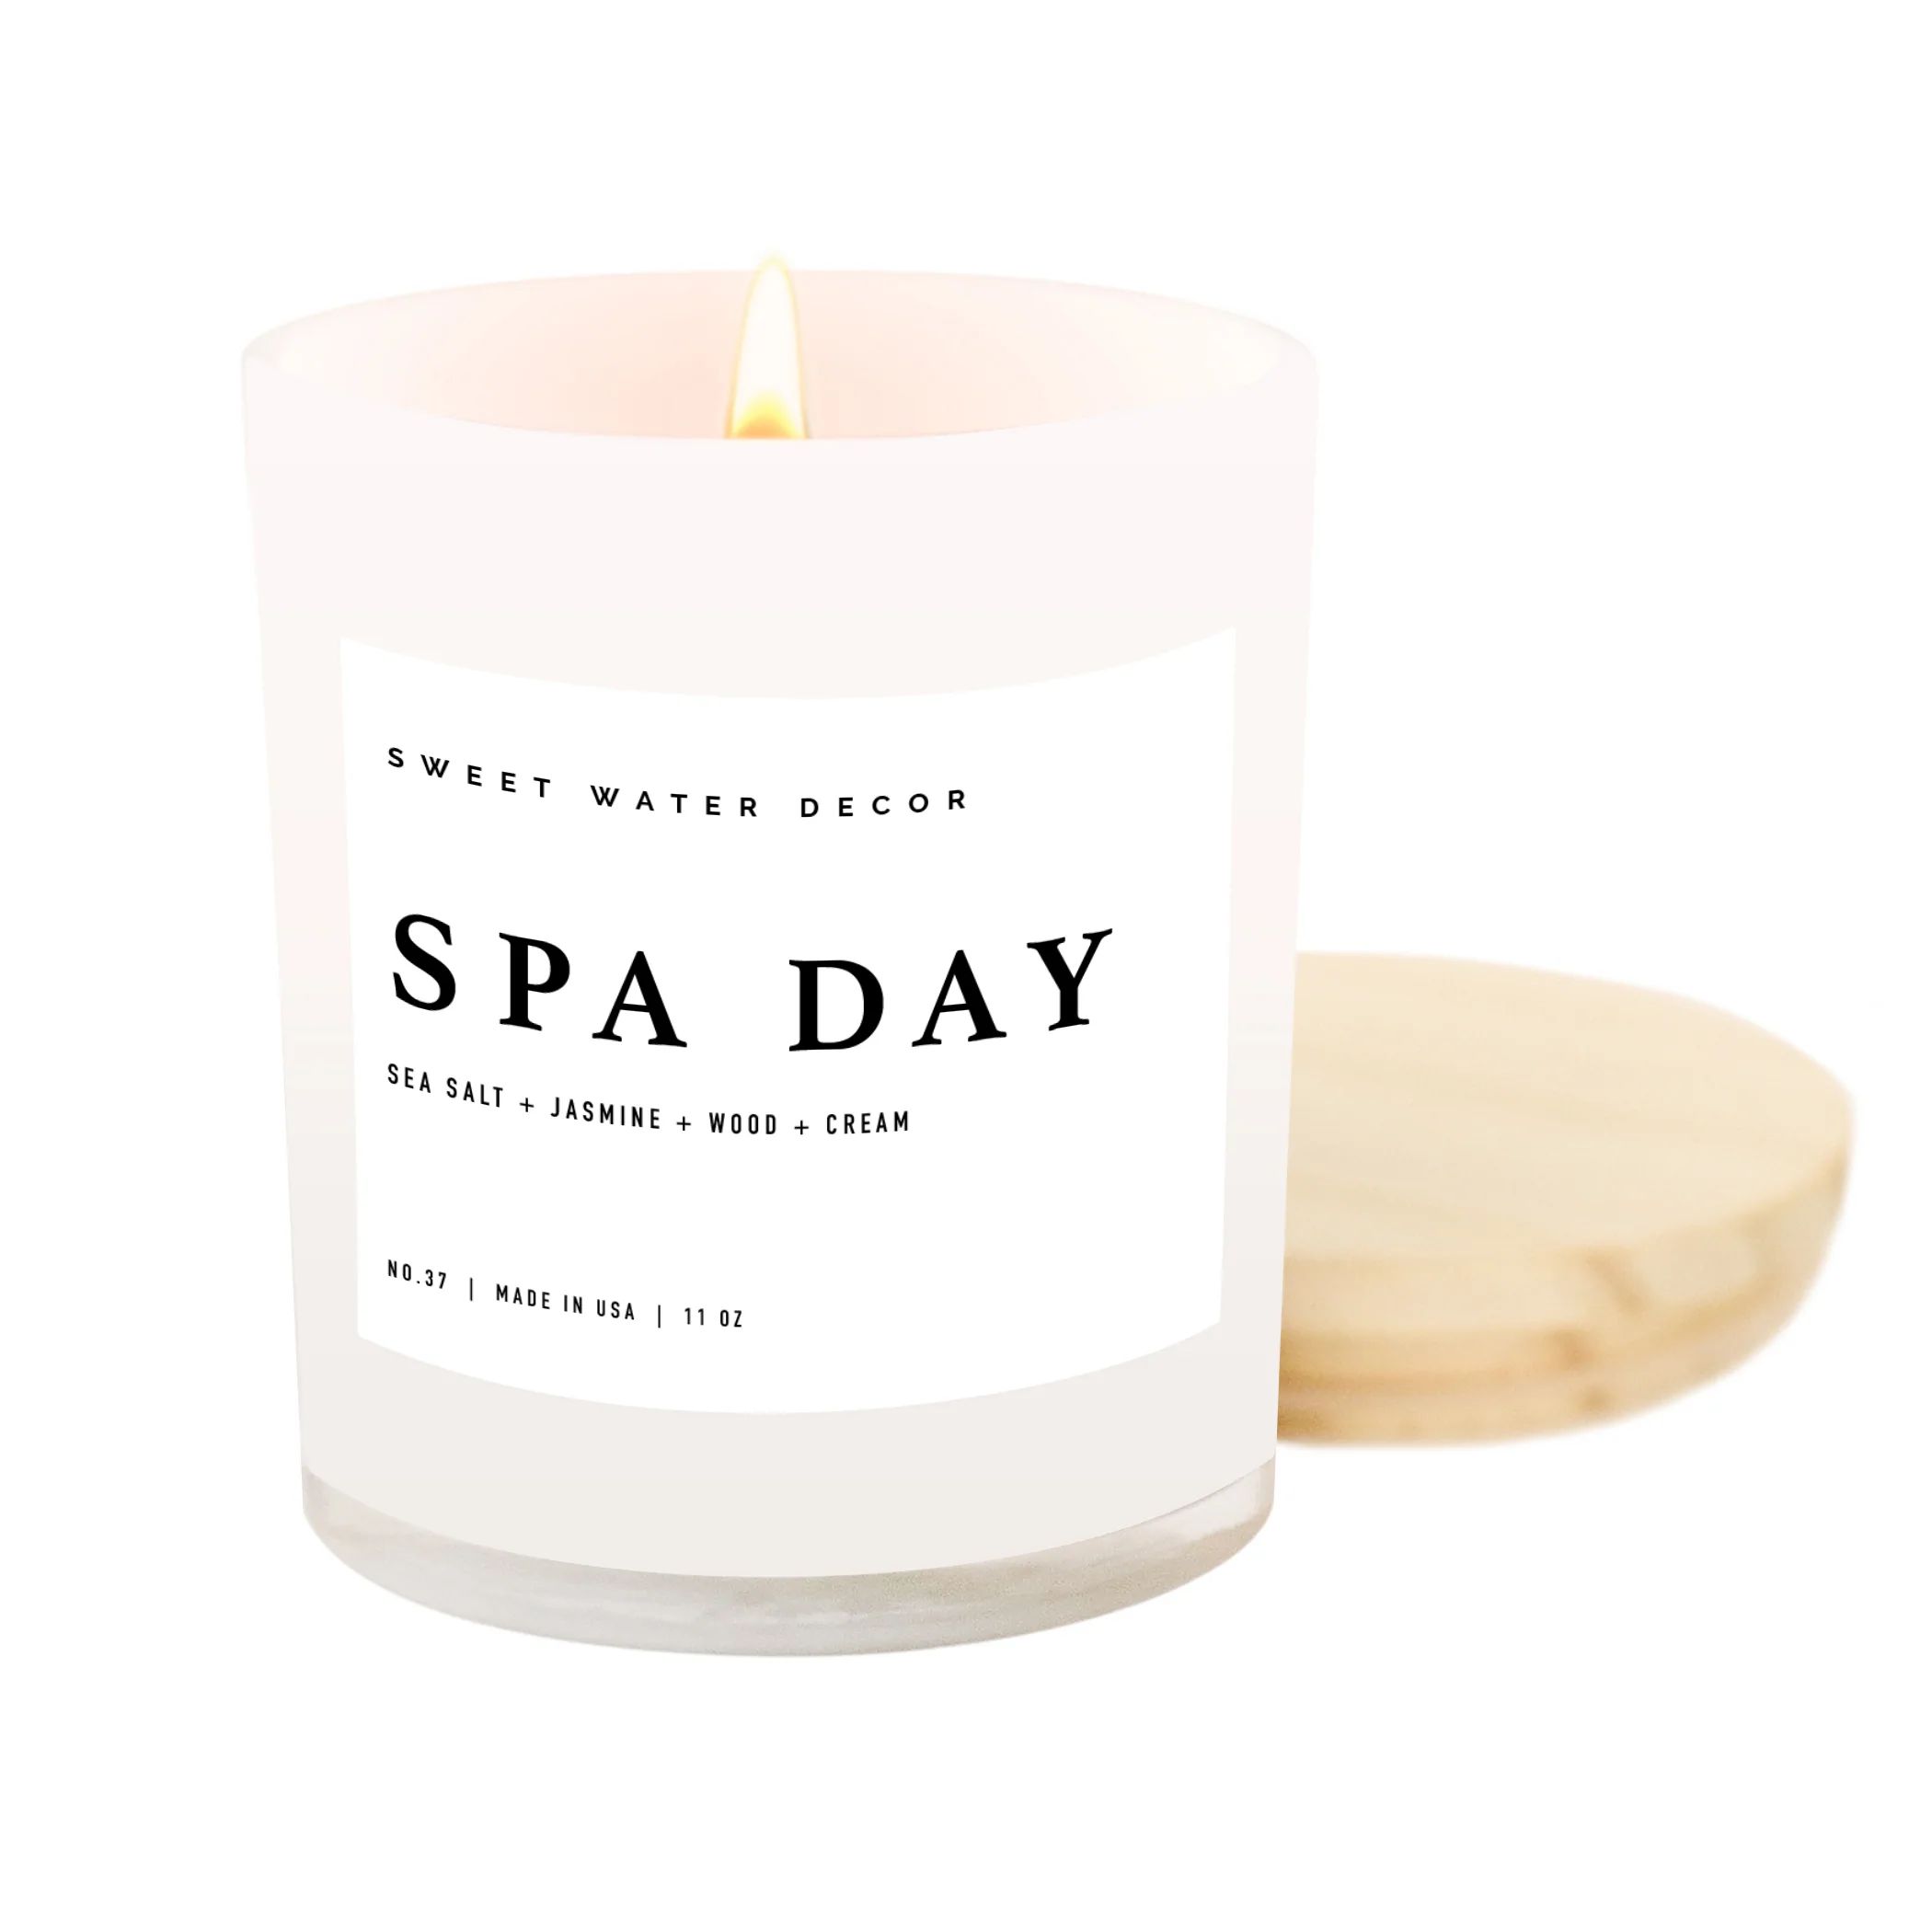 Spa Day Soy Candle | White Jar + Wood Lid | Sweet Water Decor, LLC